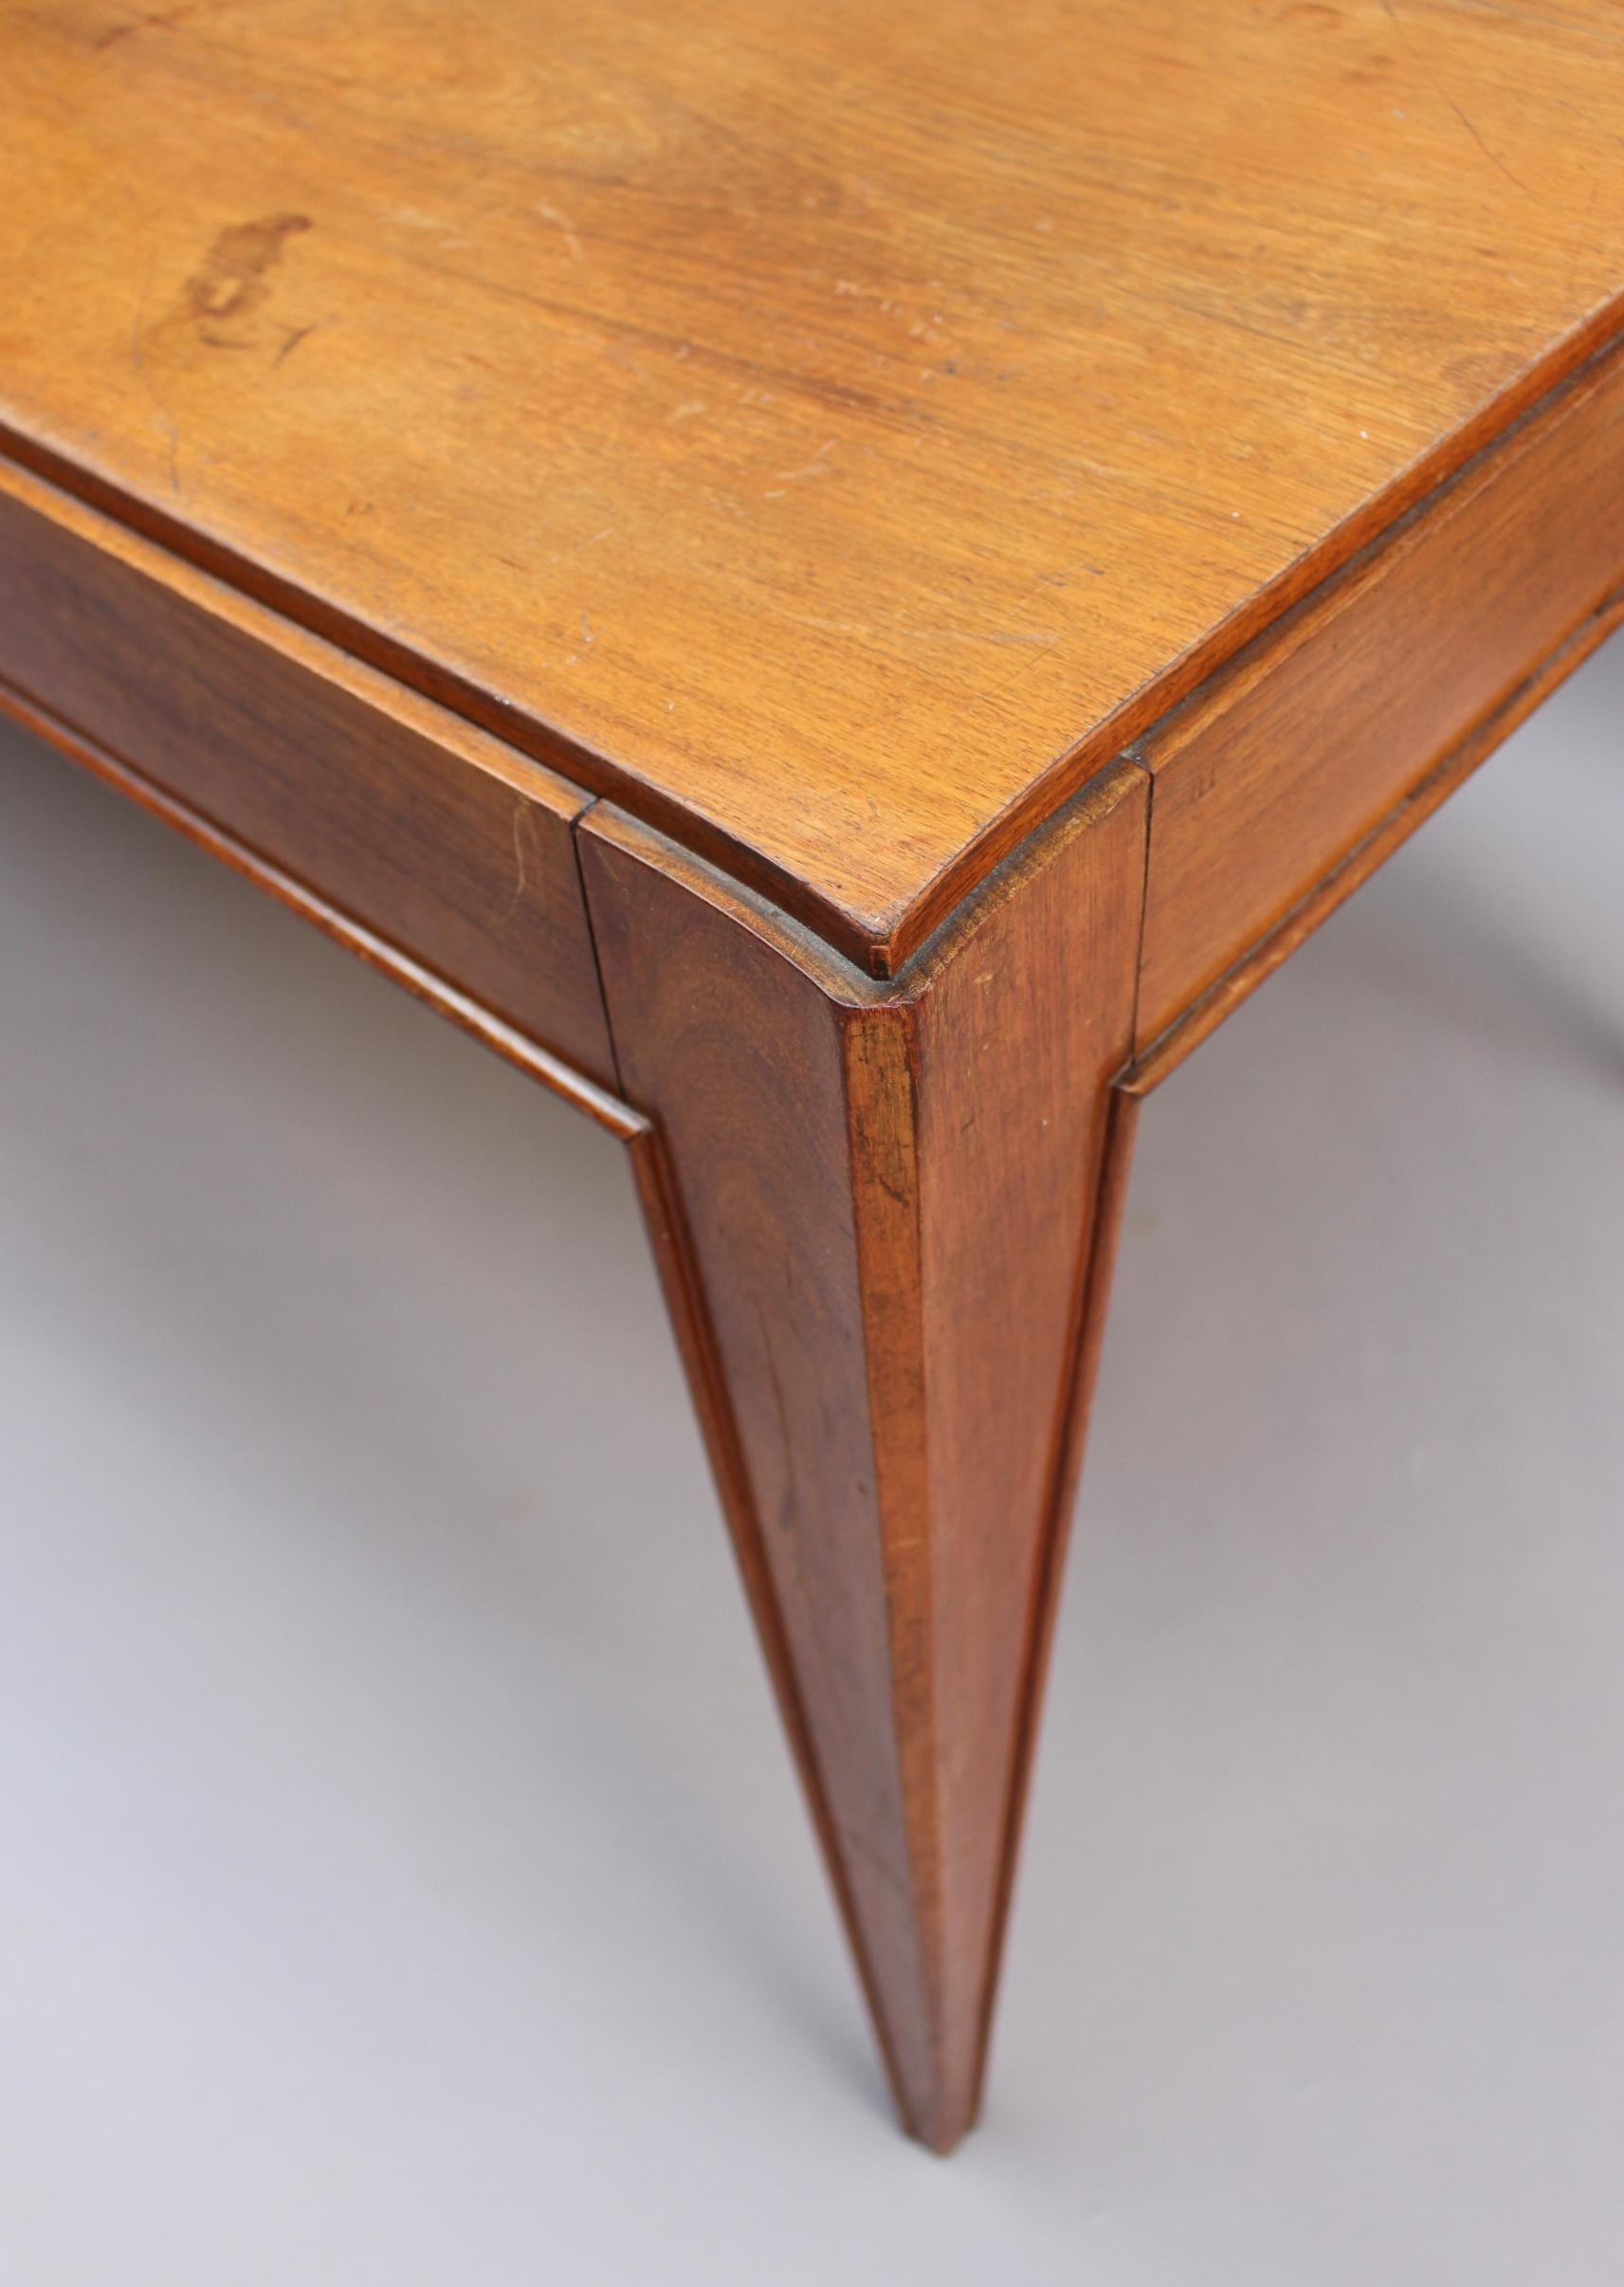 Fine French Art Deco Palisander Dining/Writing Table Attributed to Dominique For Sale 8